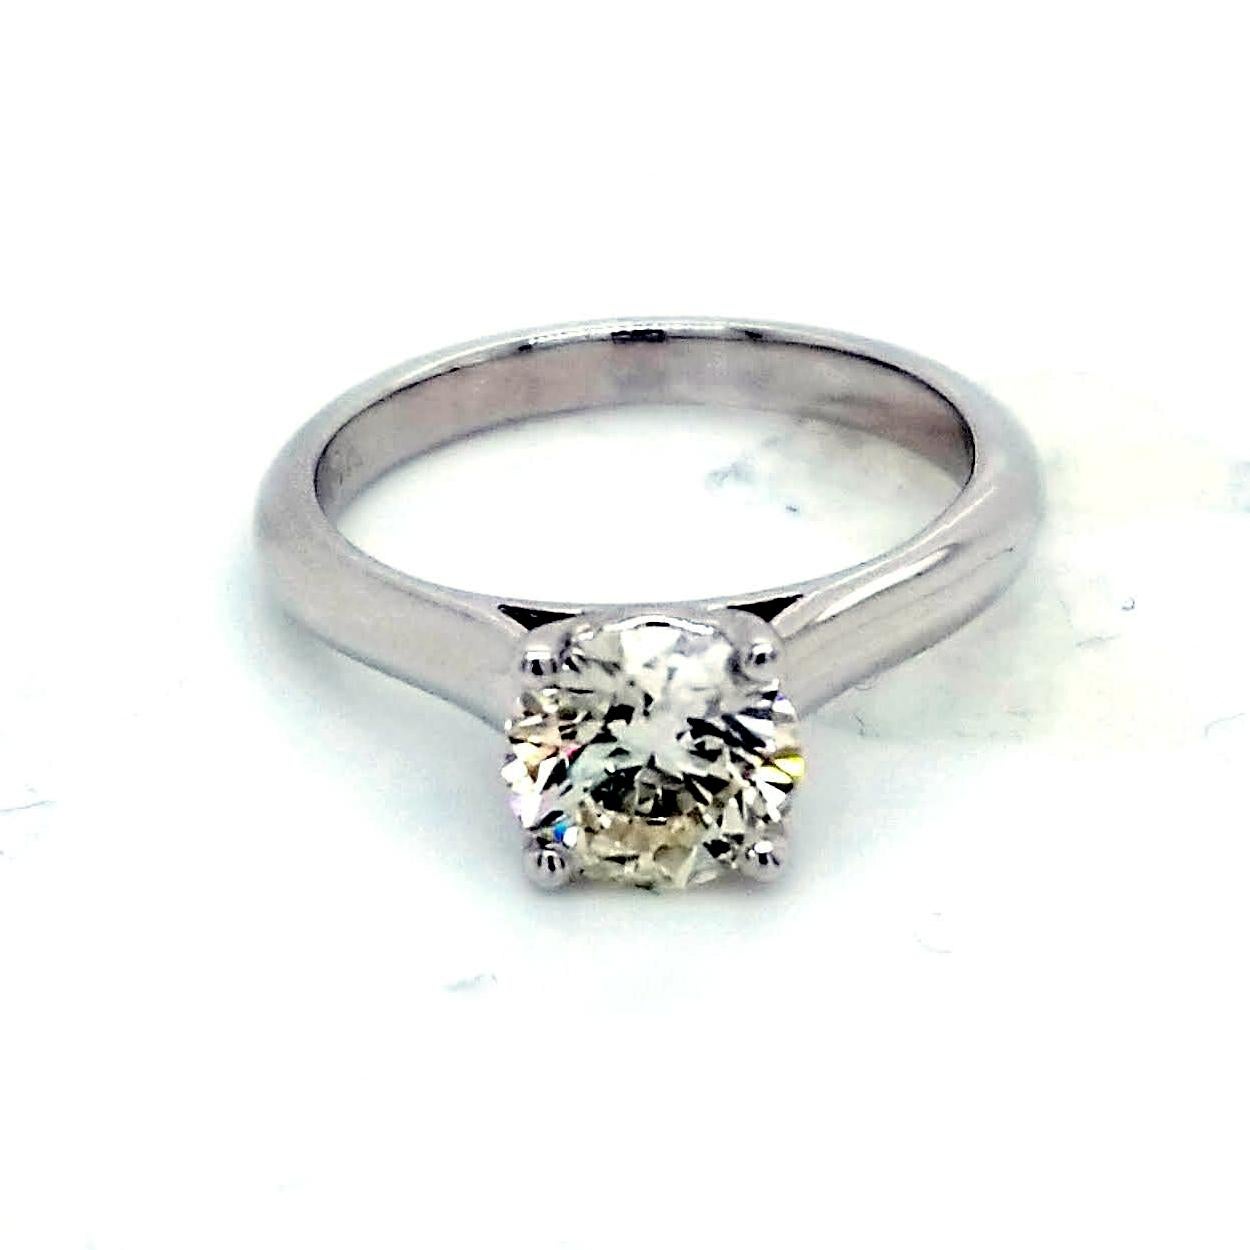 A very fine 1.31 Ct Round Brilliant I-J/SI3 EGL US certified center Diamond set in a 14K White Gold Solitaire Engagement Ring. 

Diamond specs:
Center stone: 1.31 Ct EGL US Certified I-J/SI3 Round Brilliant natural diamond
Center dimensions 6.96 mm